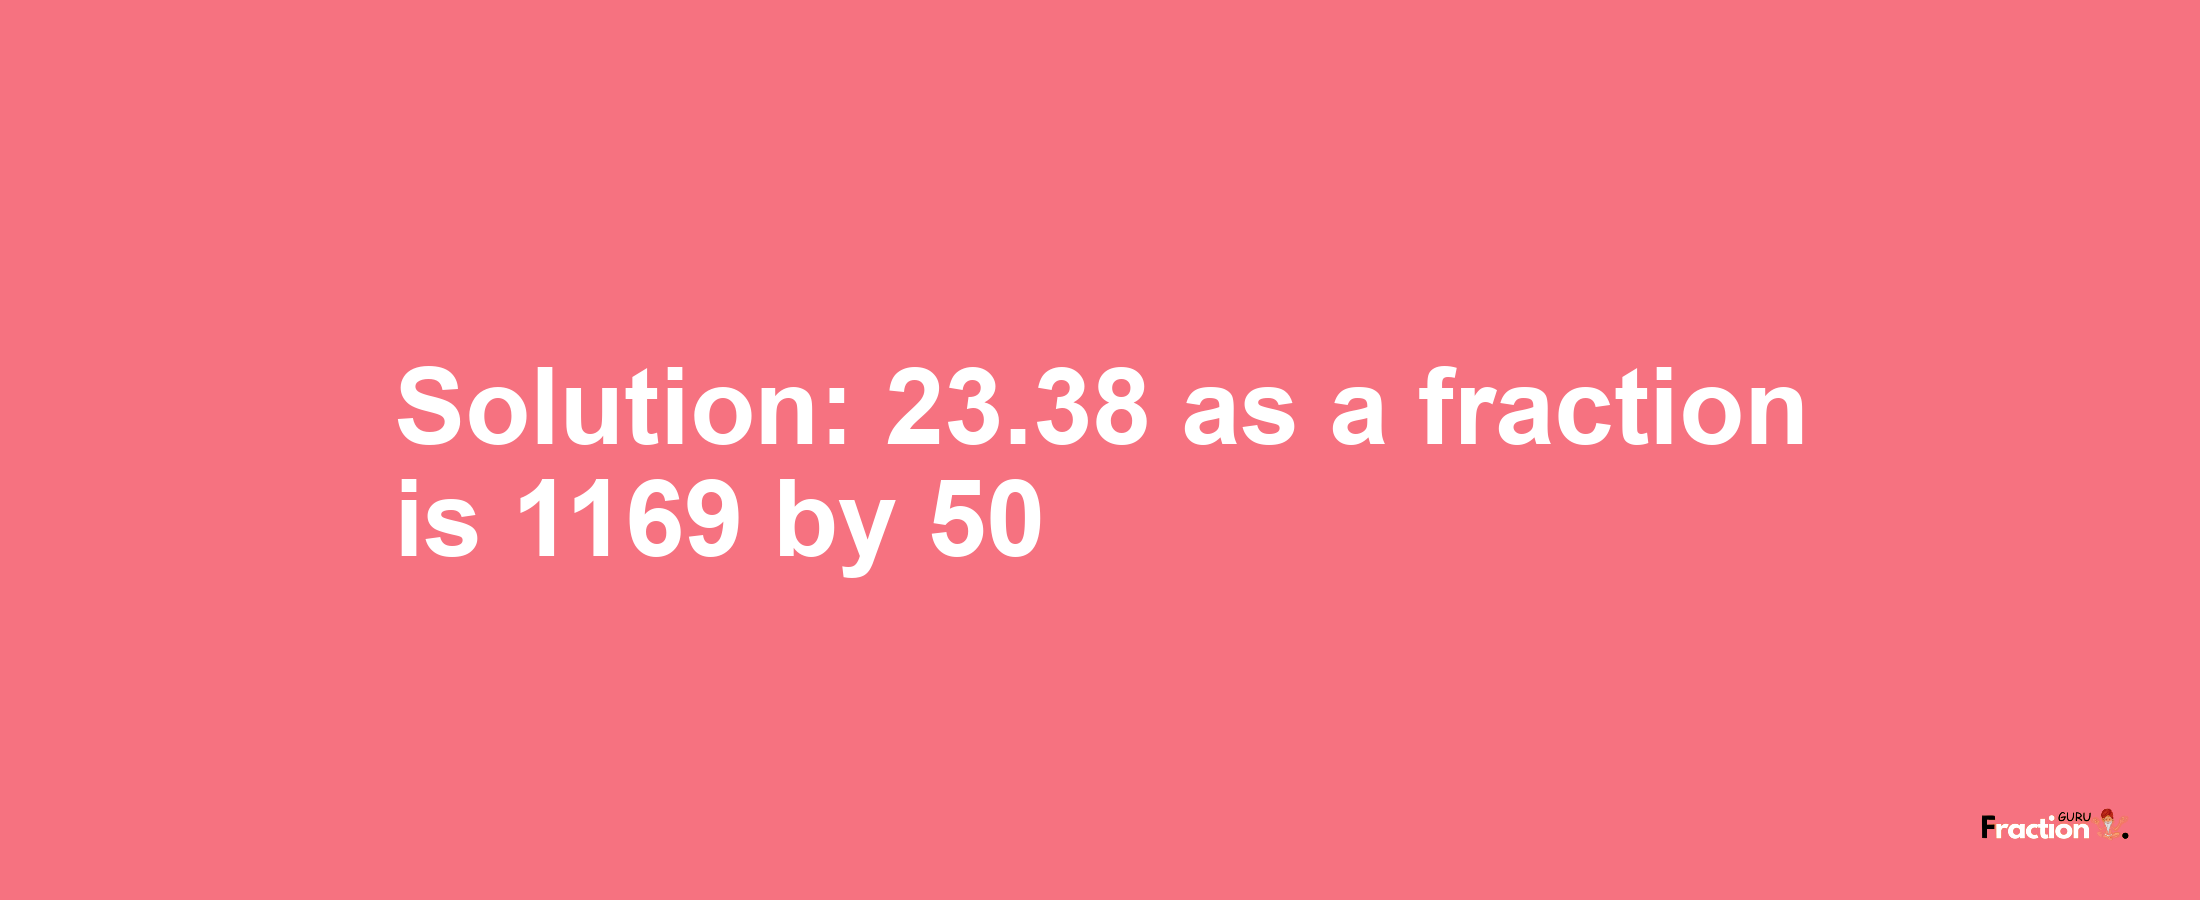 Solution:23.38 as a fraction is 1169/50